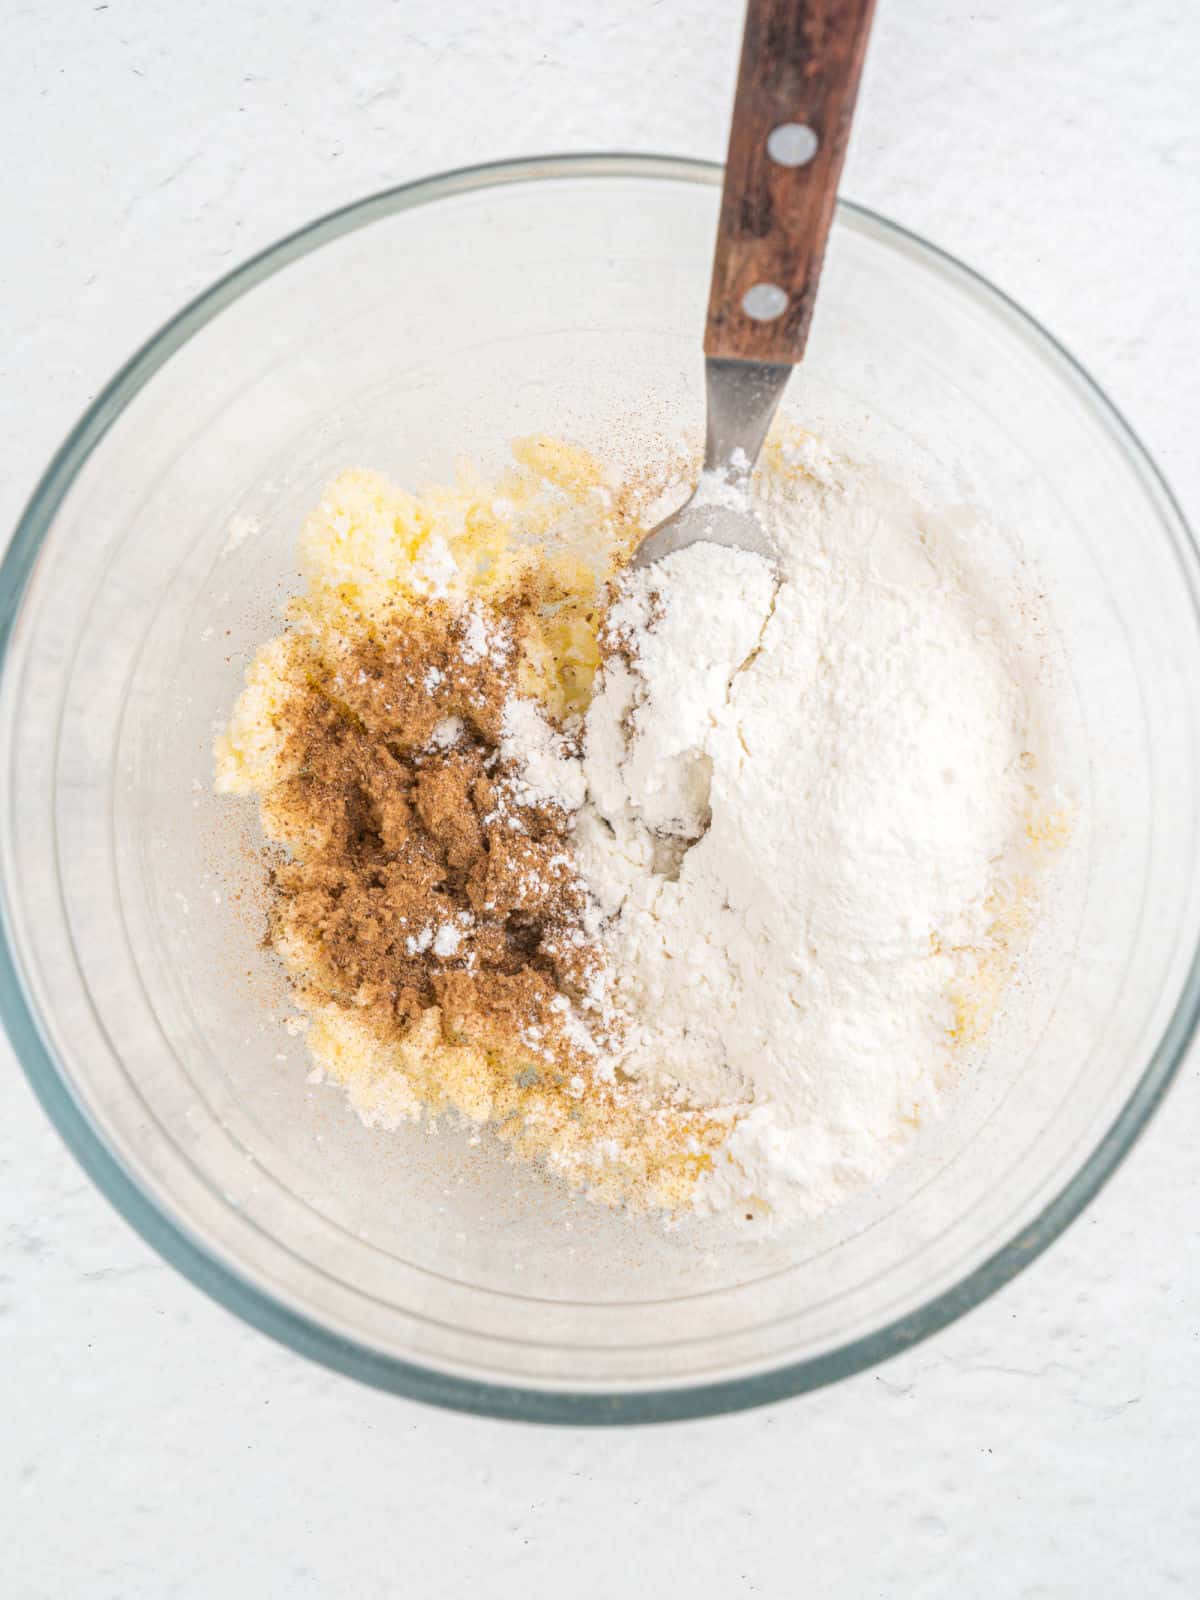 Mixing butter, flour, and brown sugar with a fork in a glass bowl on a white surface.